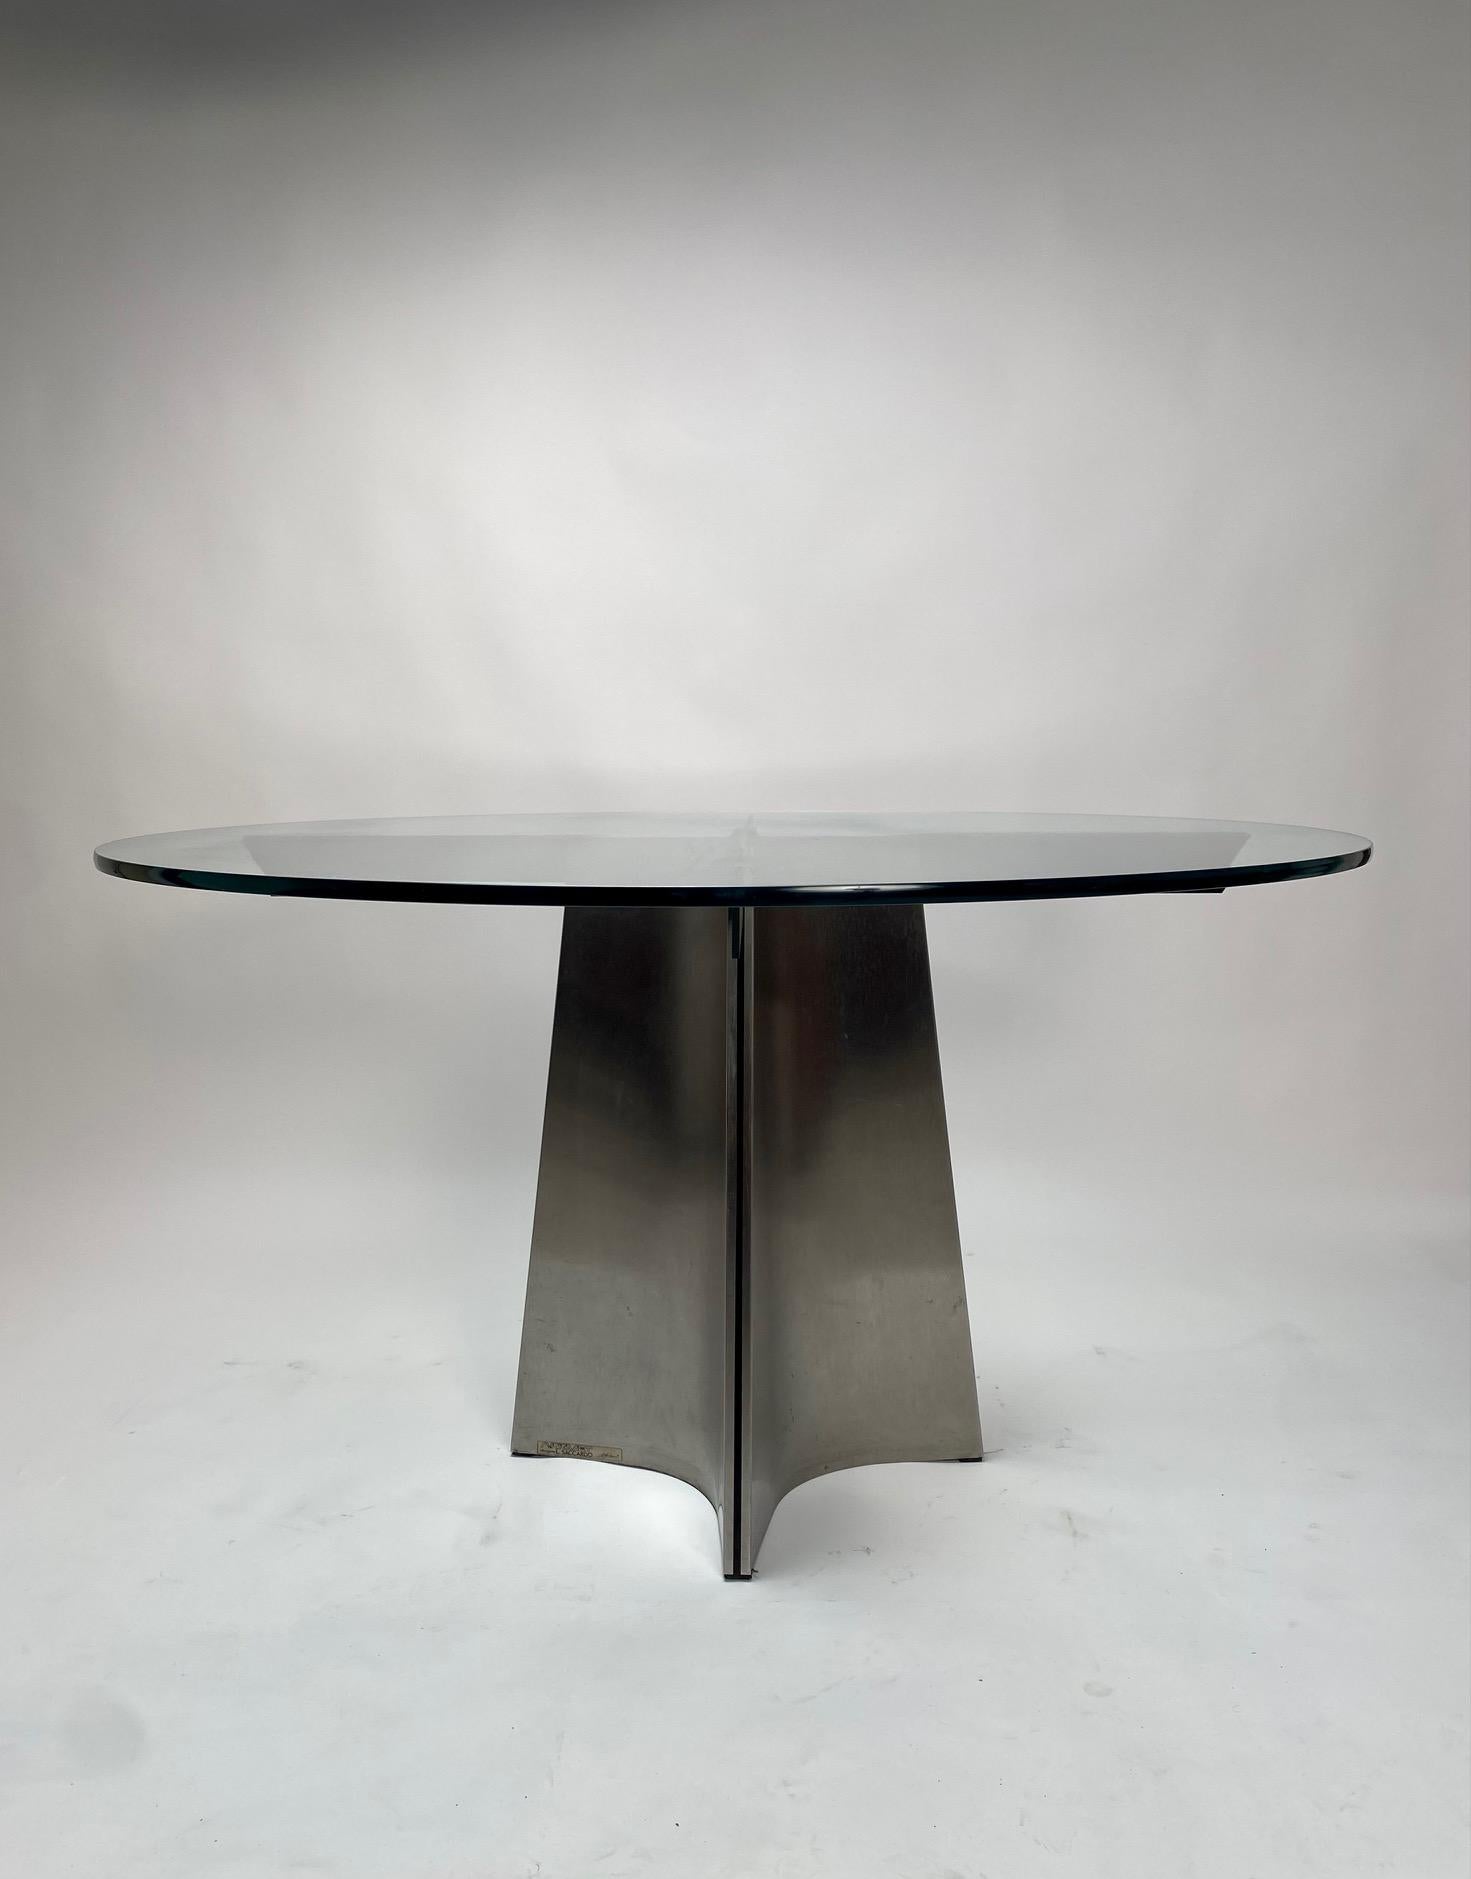 Round table by Luigi Saccardo for Maison Jansen - Arrmet, glass and aluminum, France/Italy, 1970s.

Round pedestal dining table in brushed aluminum. A circular clear glass top; the base is formed of four concave curved plates of metal, which